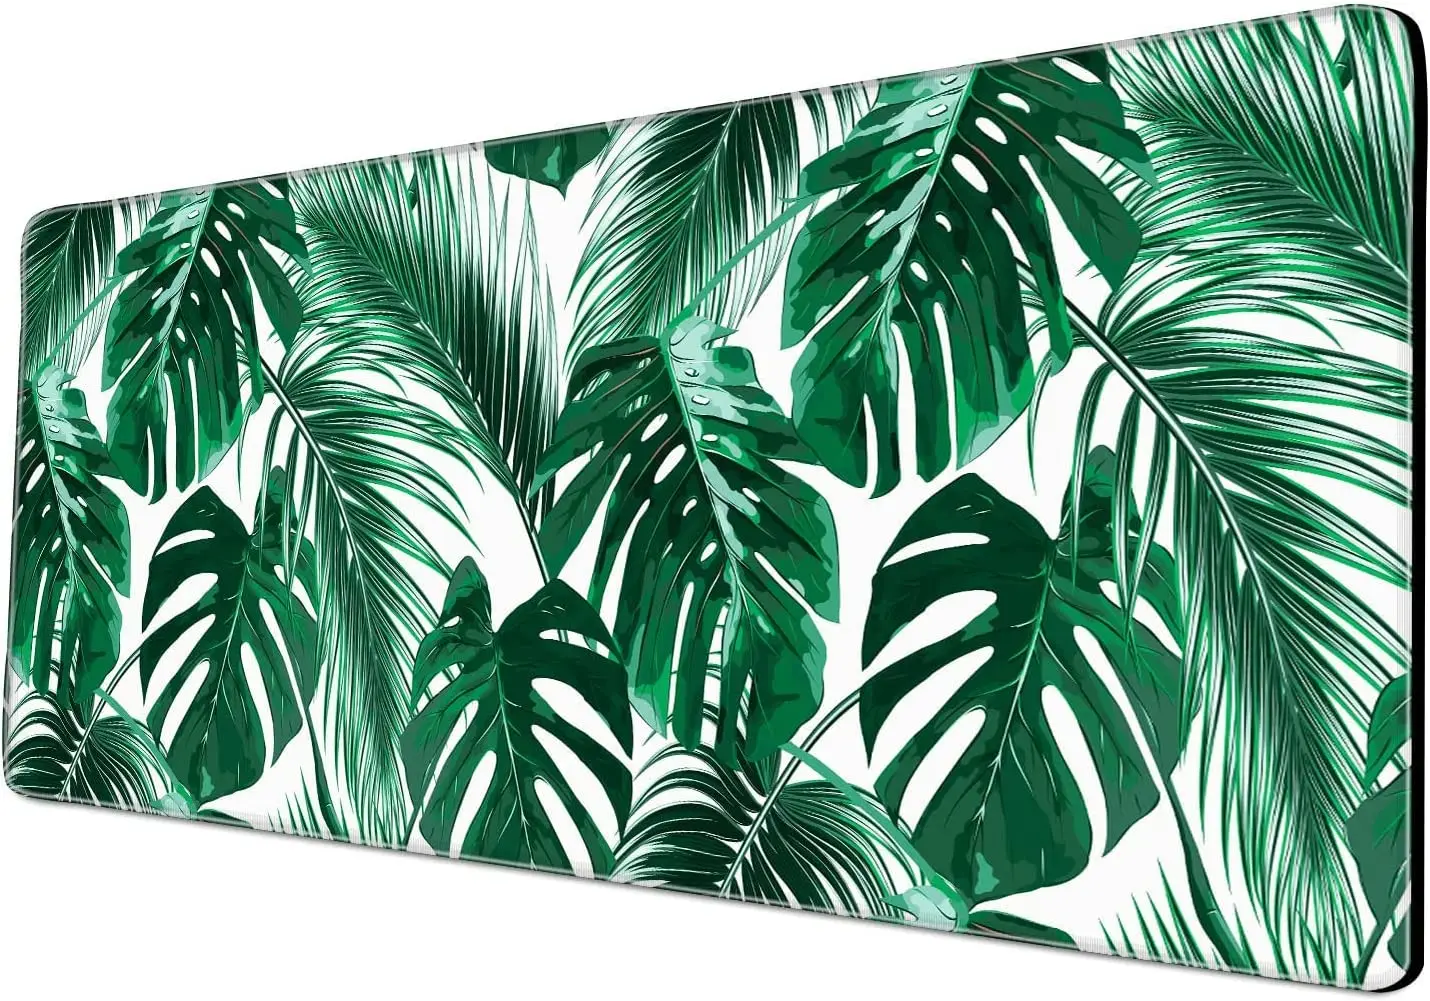 

Extended Mouse Pad Large Gaming Mouse Pad 31.5x11.8x0.12 inch Mouse Mat Non-Slip Rubber Base and Stitched Edges Tropical Leaves